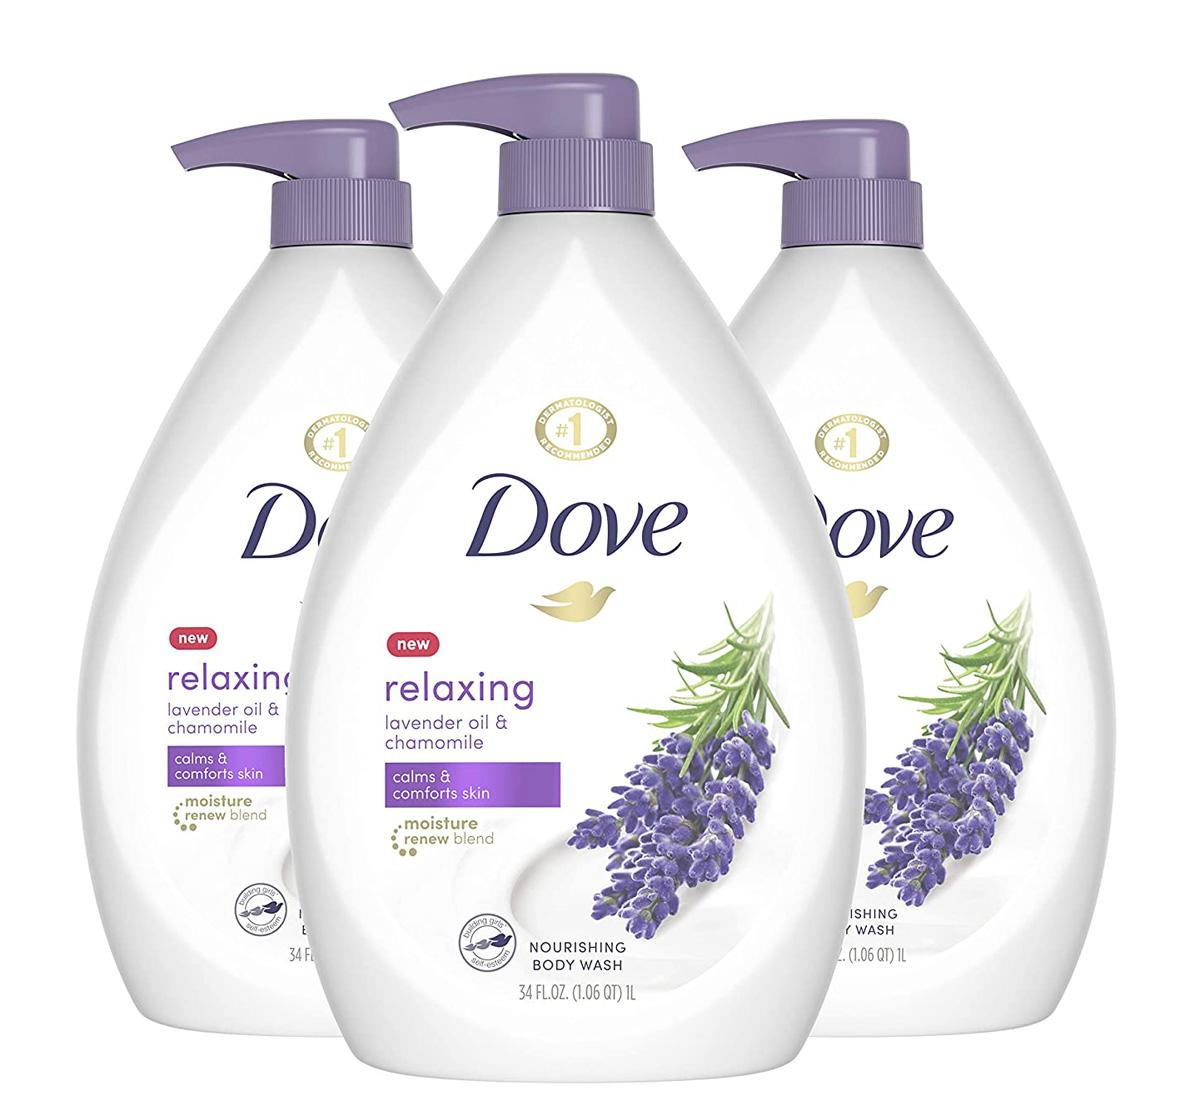 3 Dove Relaxing Body Wash Pump Calms Lavender and Chamomile for $20.96 Shipped